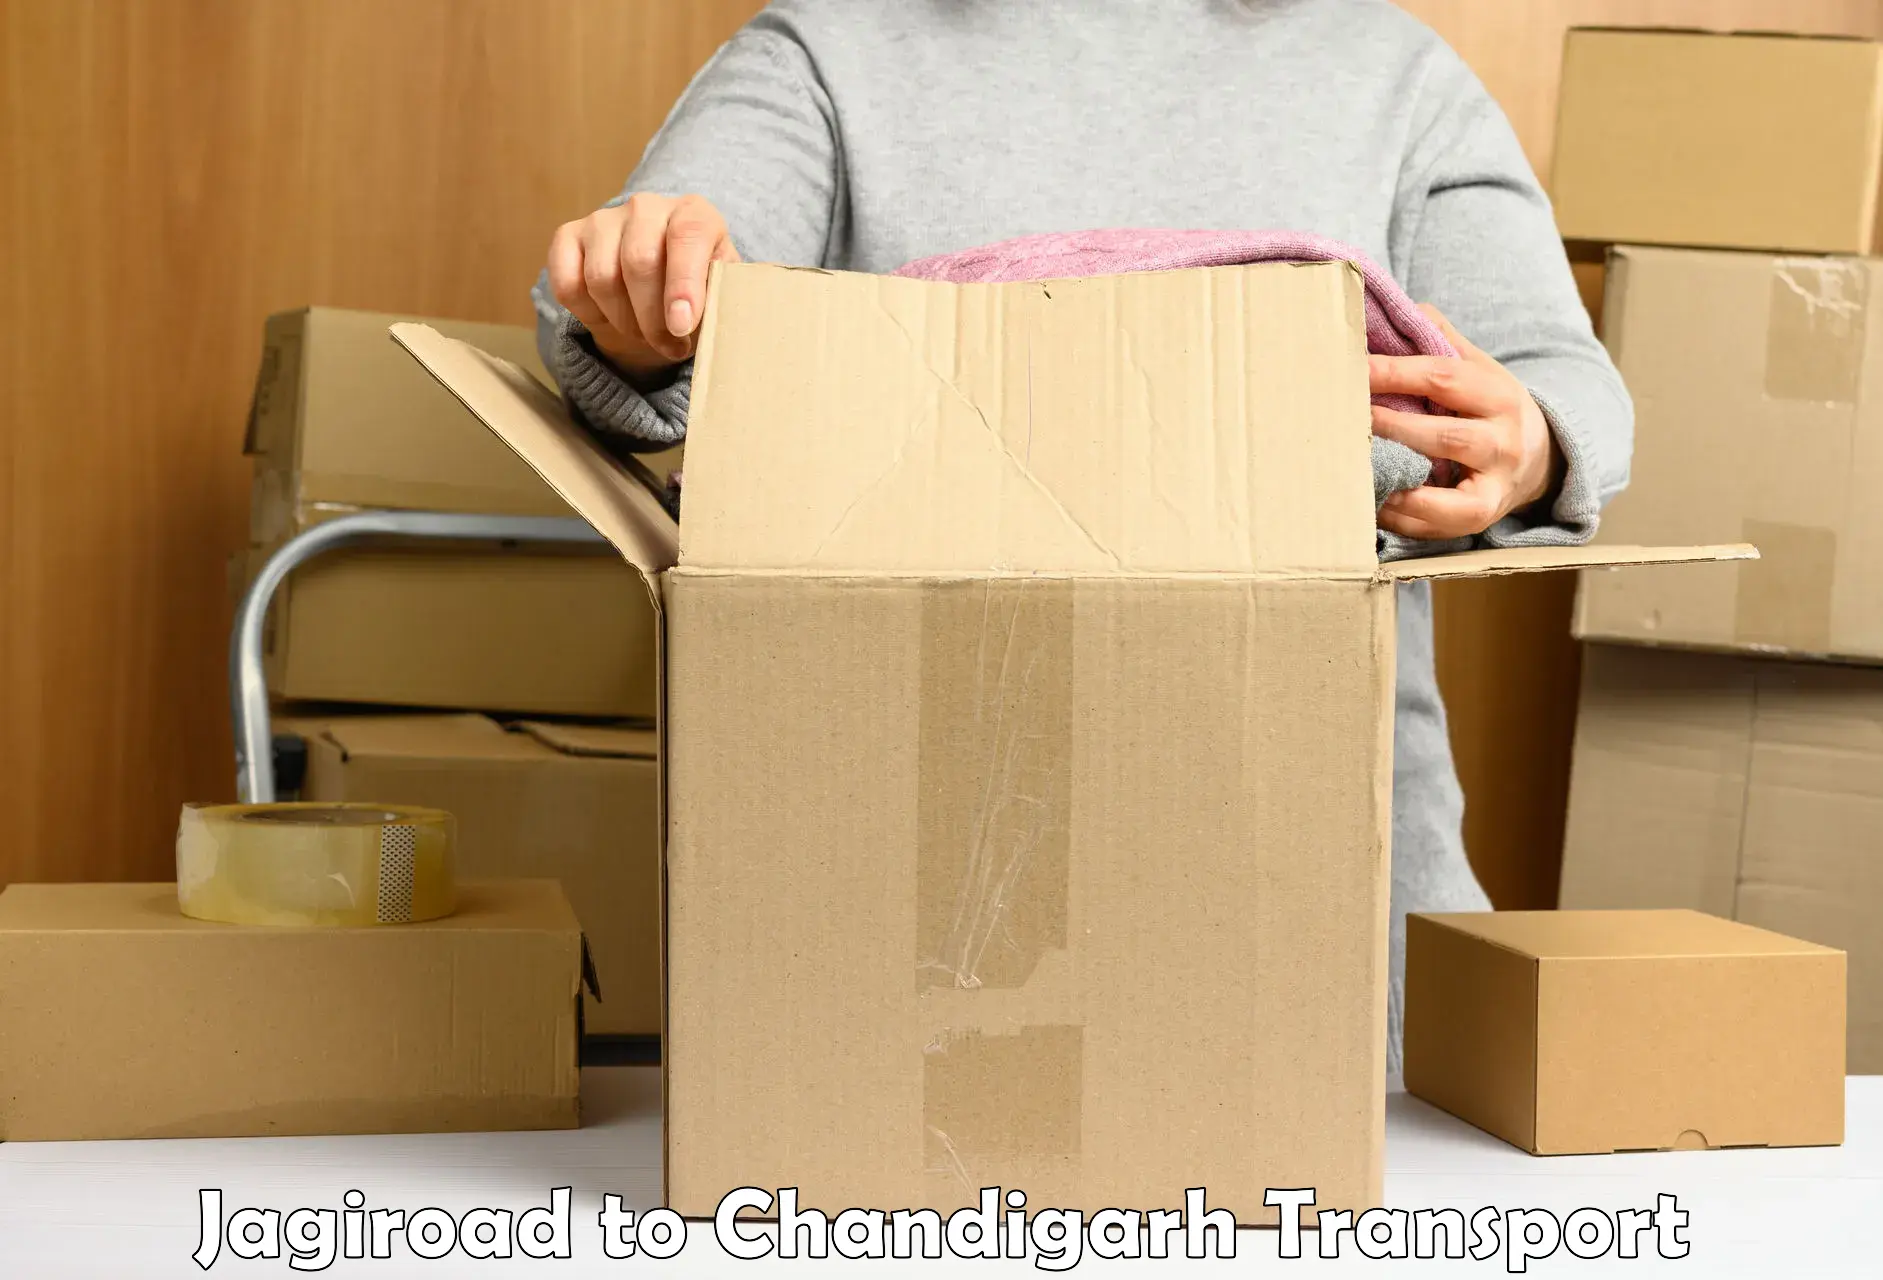 Container transport service Jagiroad to Chandigarh